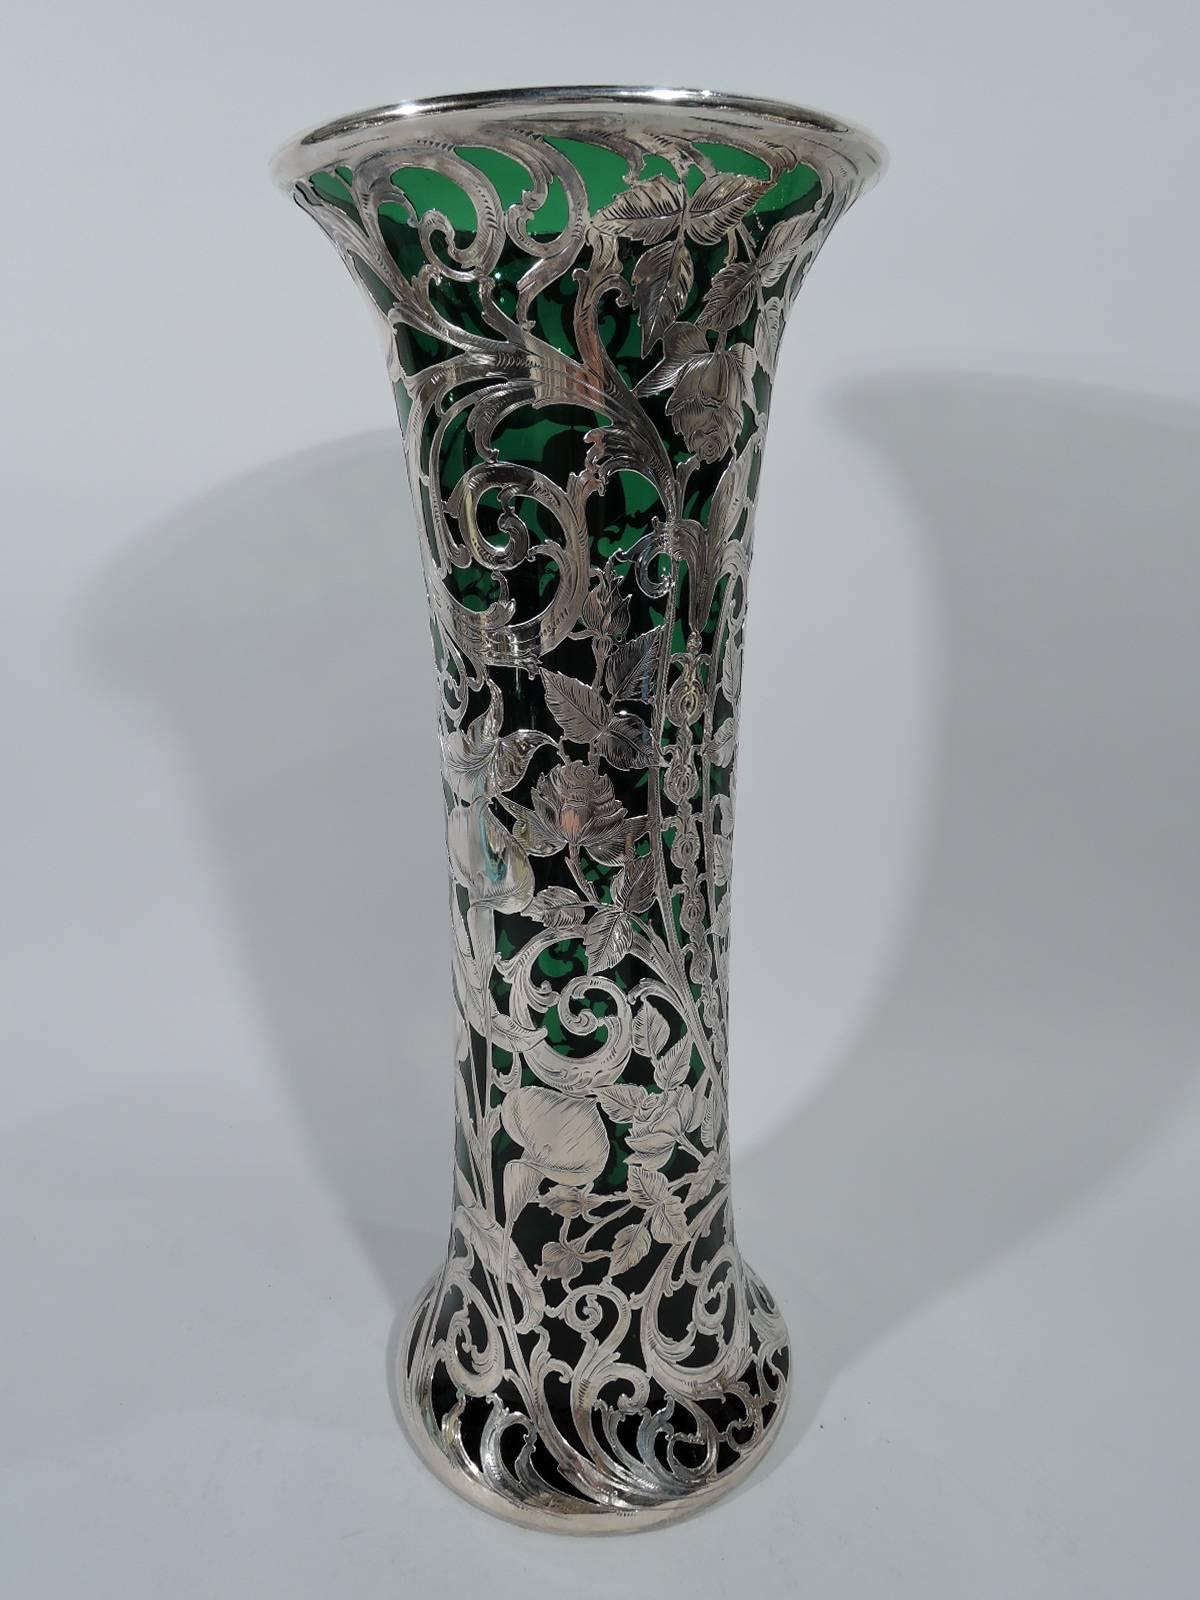 Tall Art Nouveau emerald glass vase with silver overlay. Made by Alvin in Providence. Cylindrical with flared rim and spread foot. Dense and engraved foliate scrolls and flowers. A fluid and dynamic design with lush blooms. Scrolled cartouche